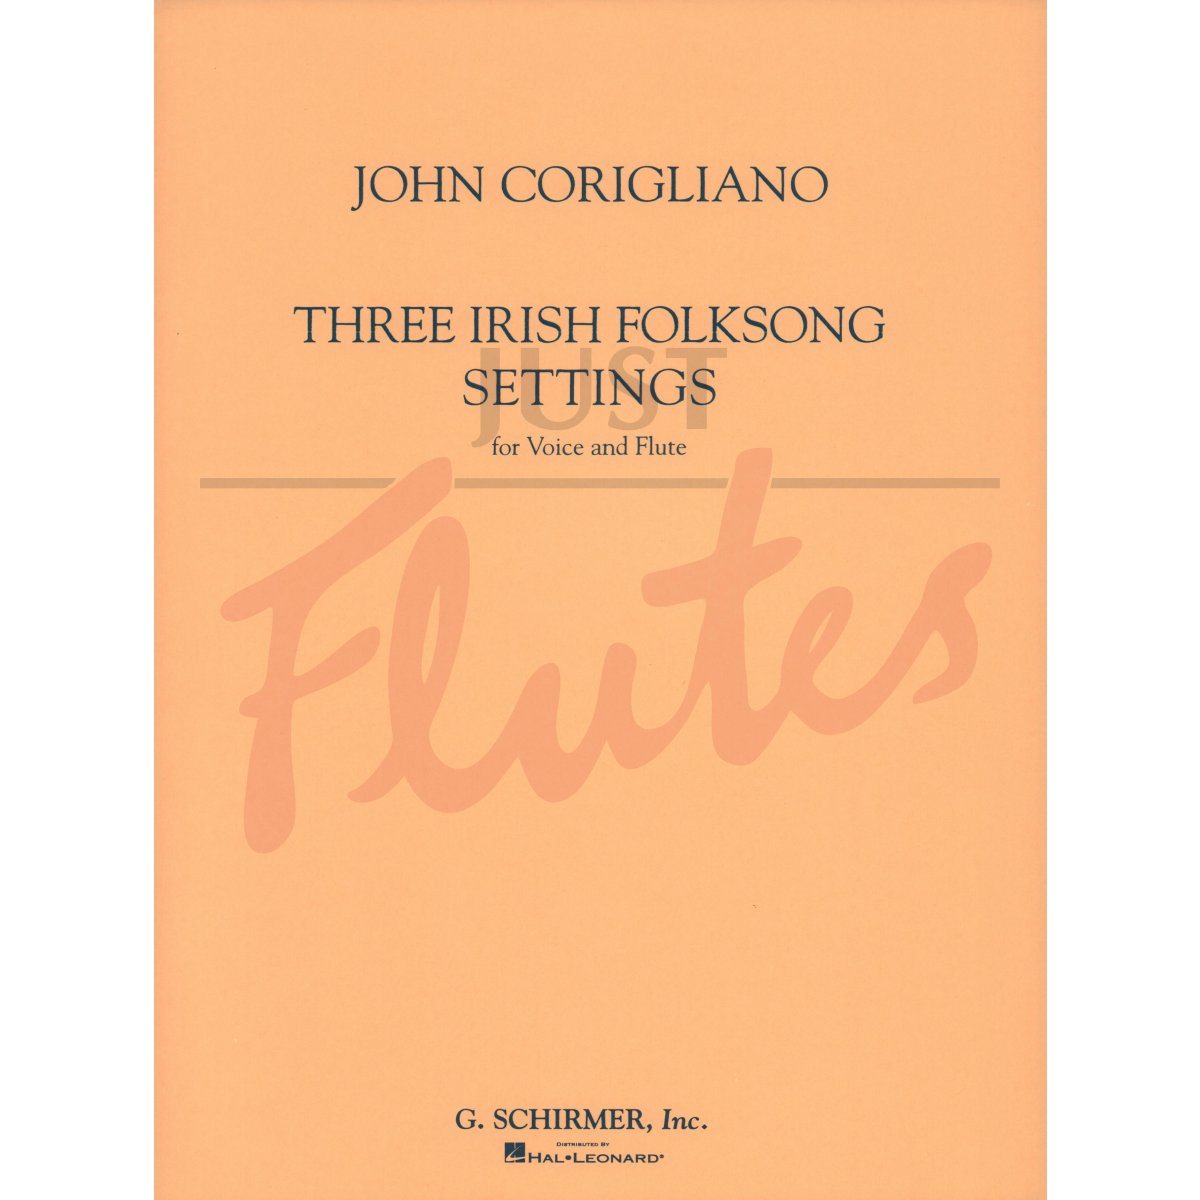 Three Irish Folksong Settings for Voice and Flute